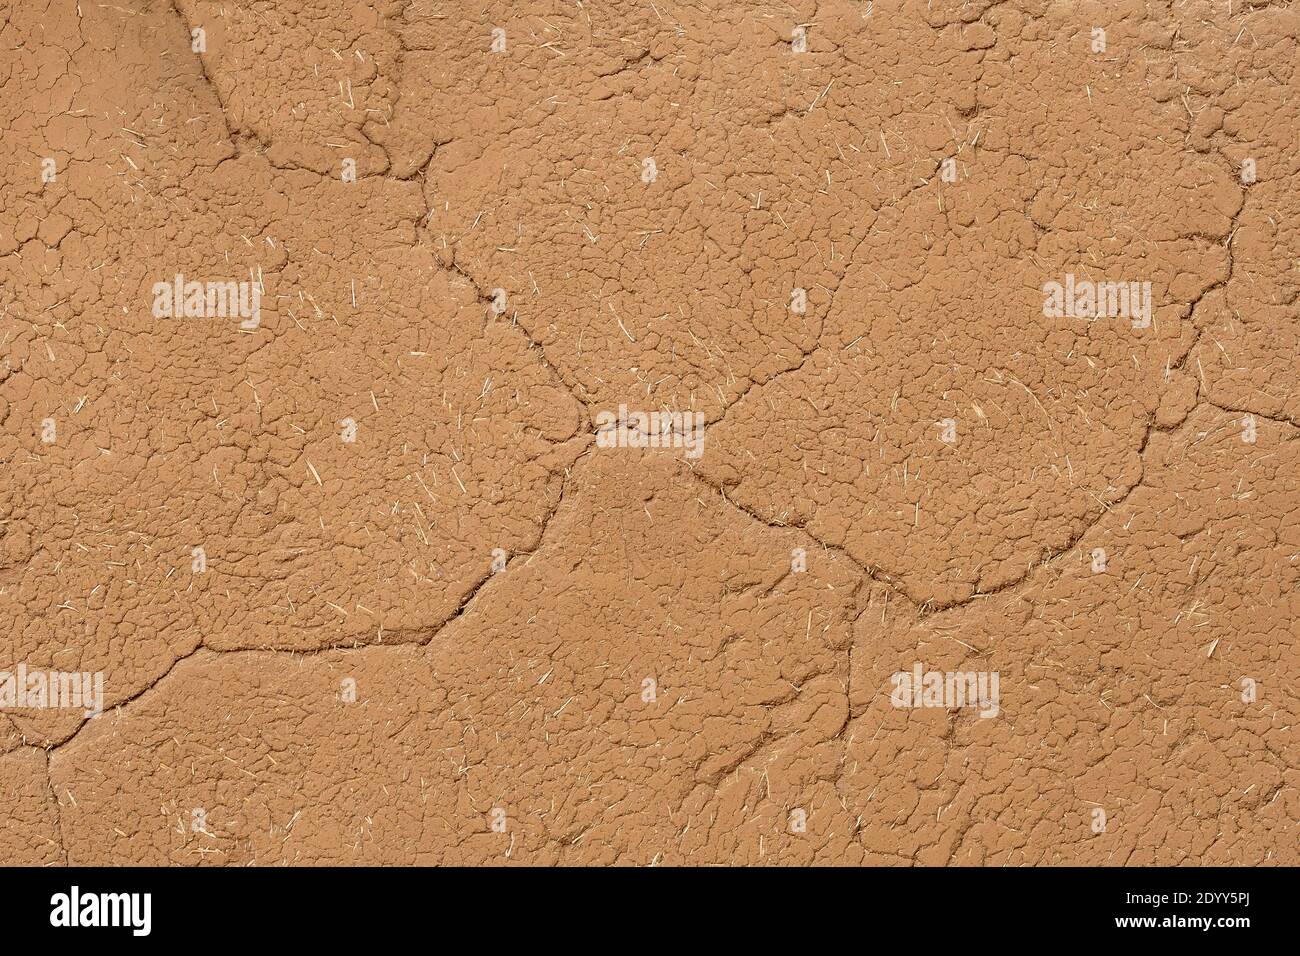 Graphic close up detail of an adobe mud and straw wall, with cracks. Taos Pueblo, New Mexico, USA Stock Photo